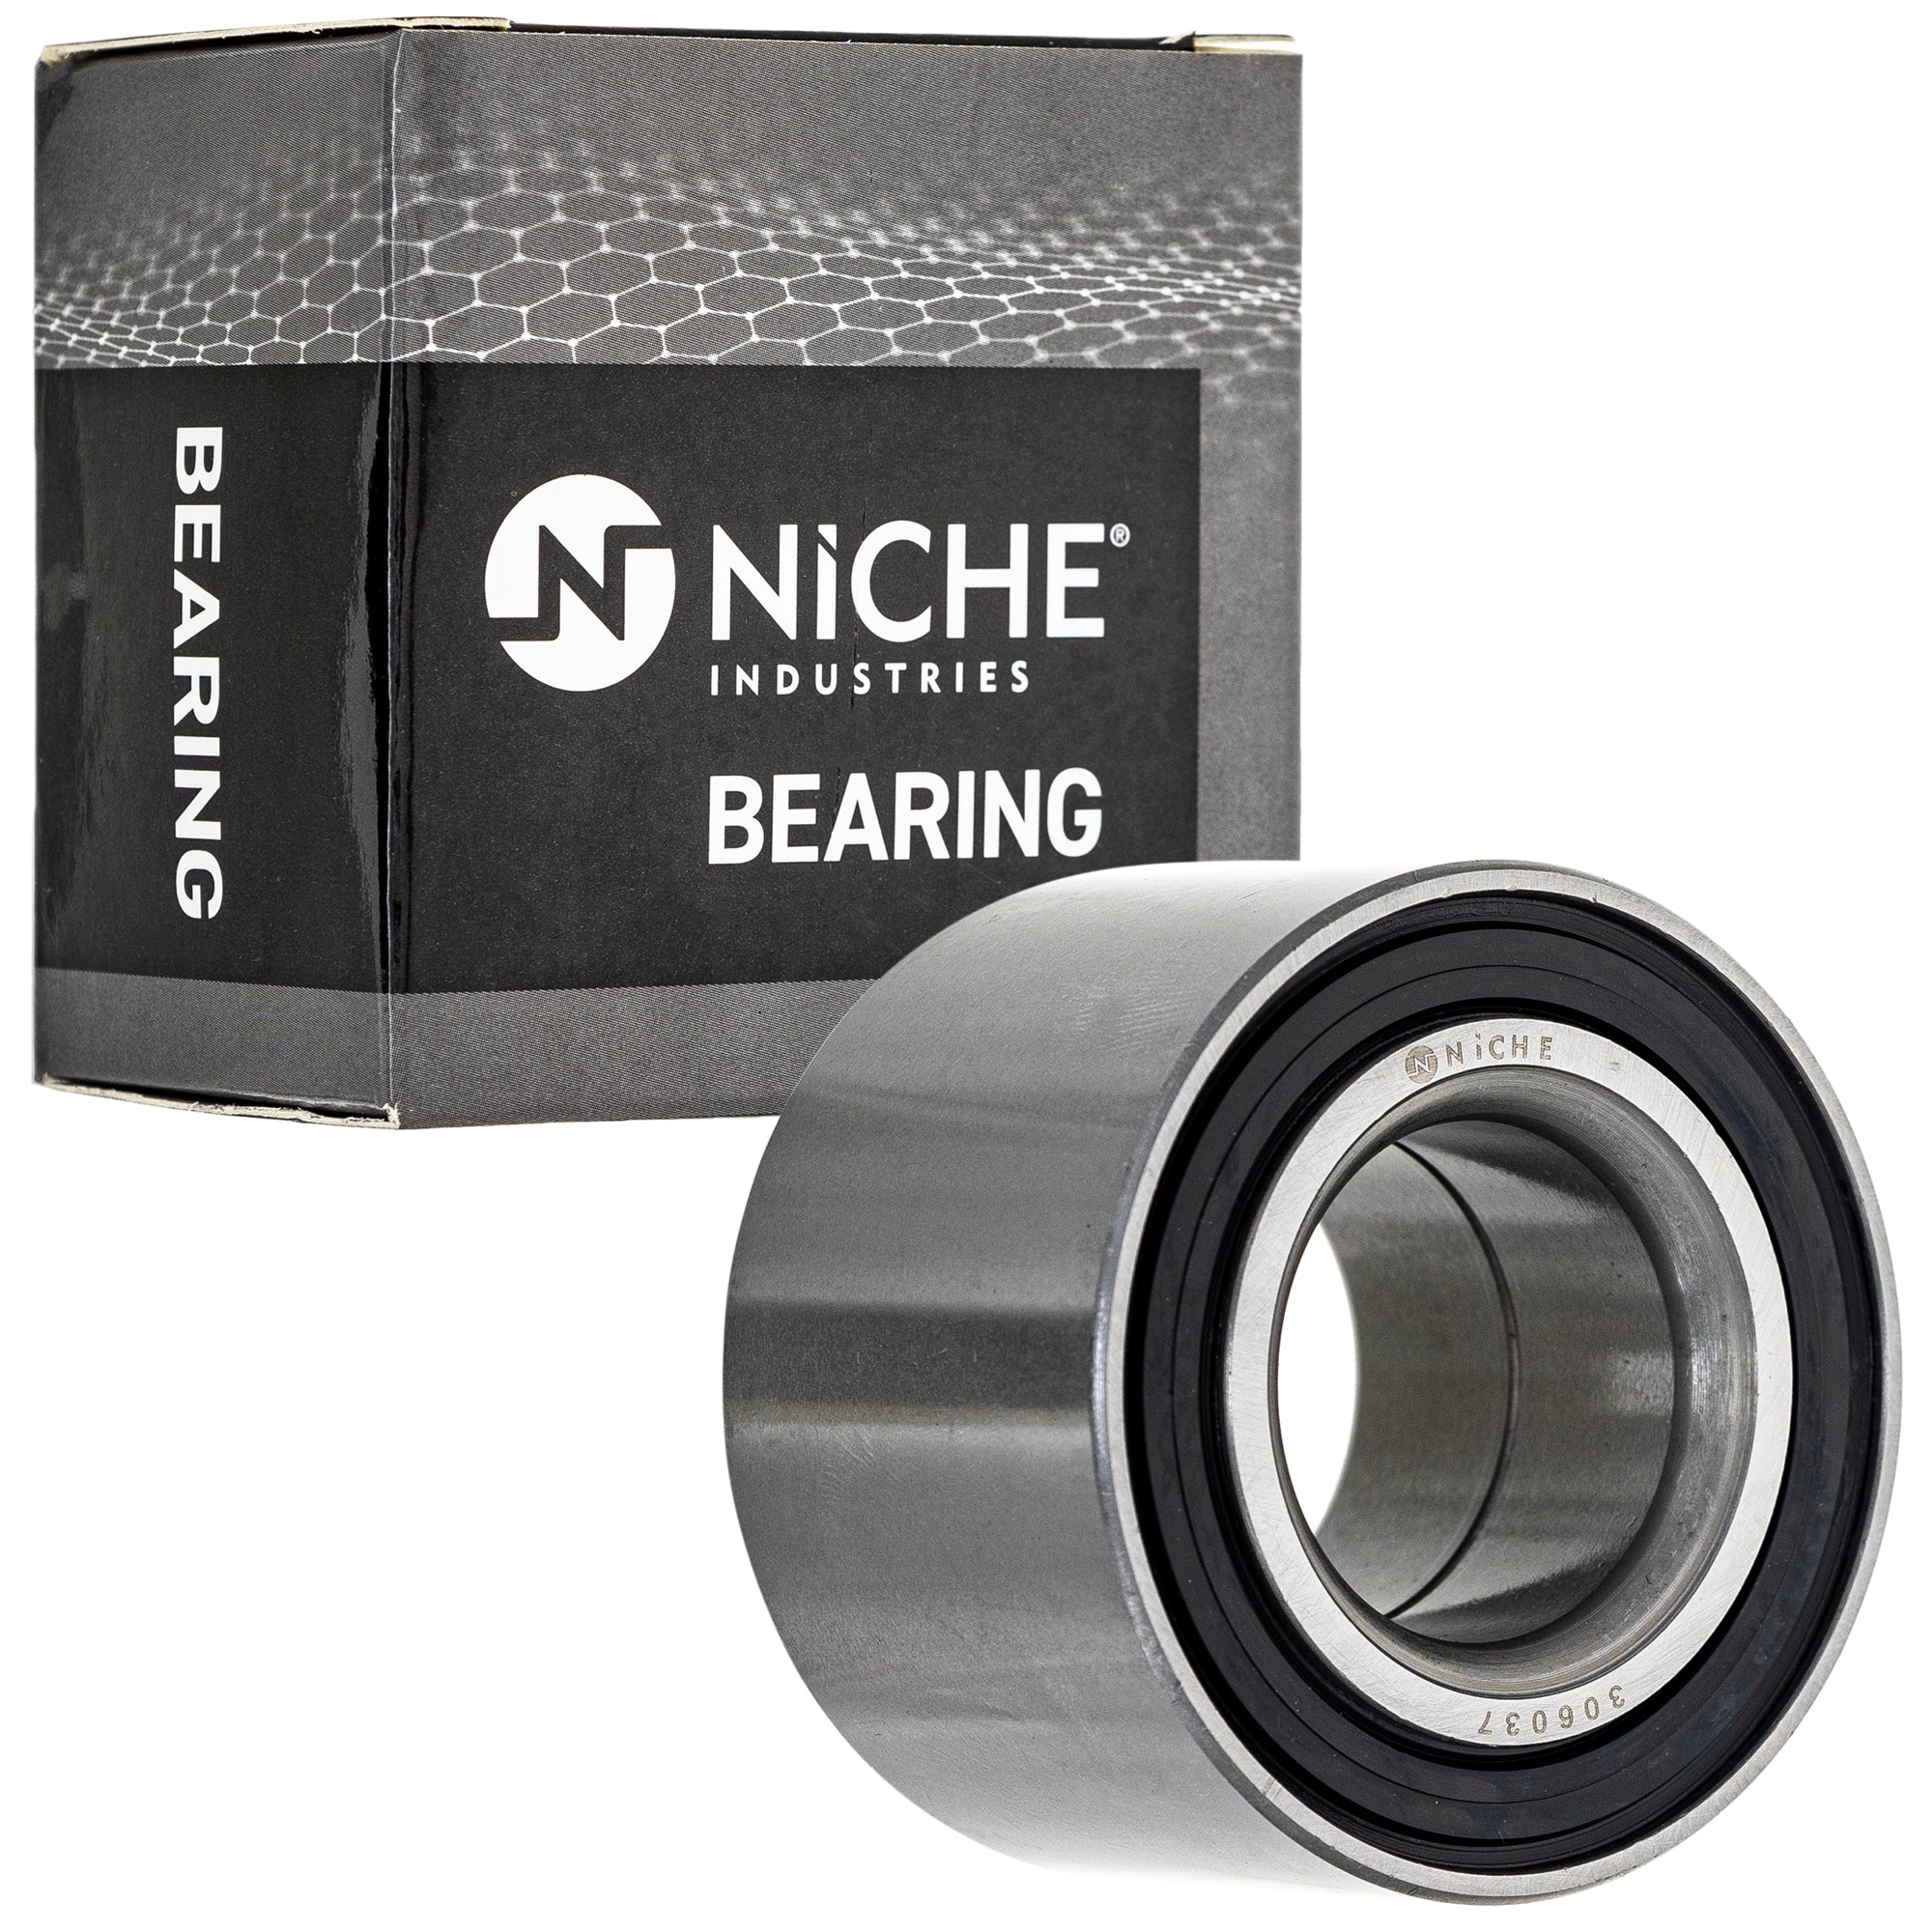 NICHE 519-CBB2261R Bearing 10-Pack for zOTHER BRP Can-Am Ski-Doo